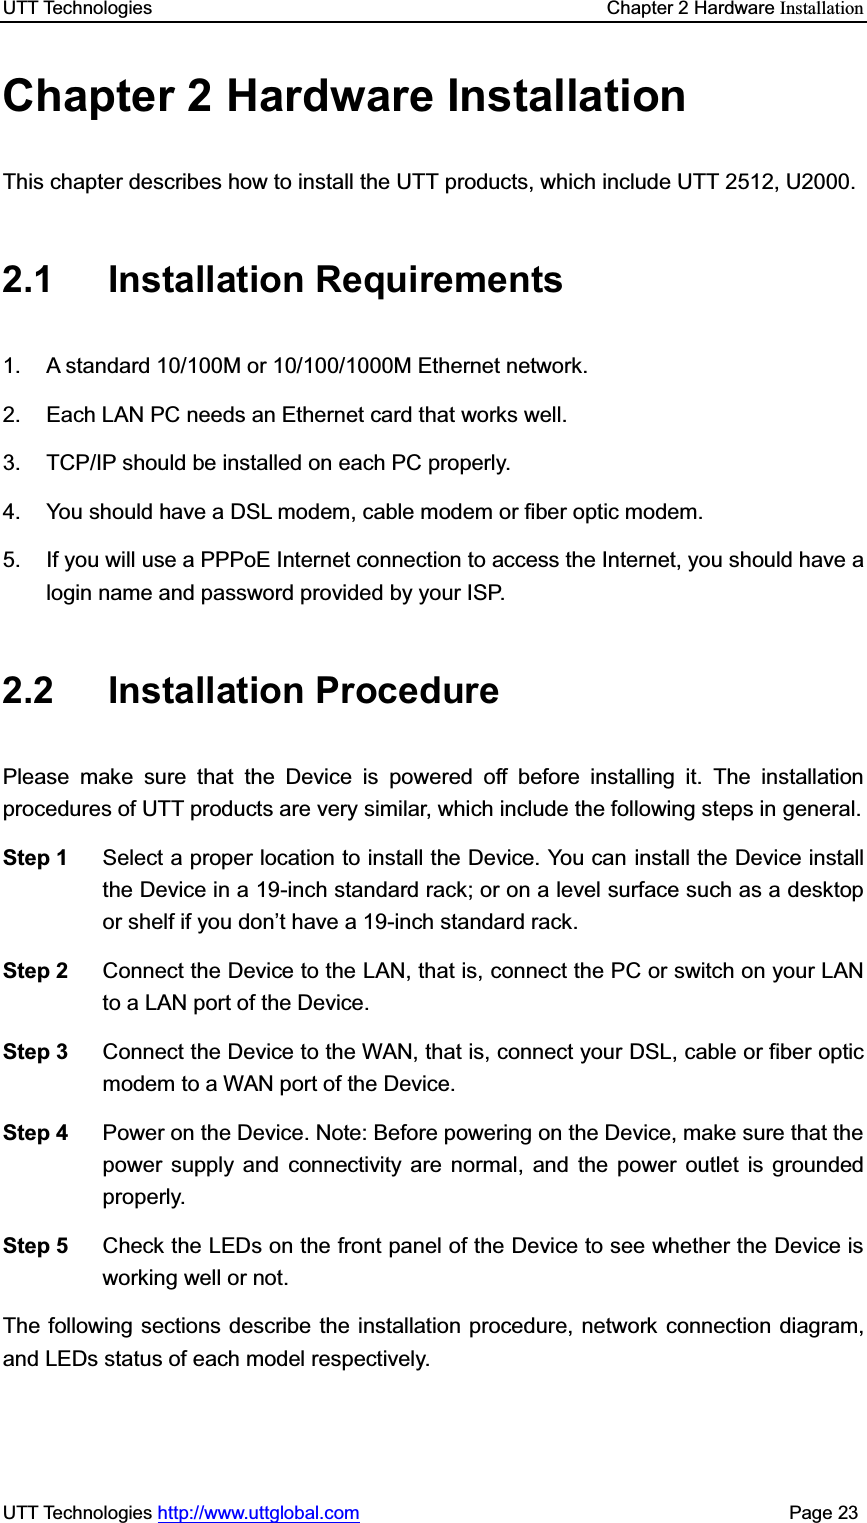 UTT Technologies    Chapter 2 Hardware InstallationUTT Technologies http://www.uttglobal.com                                              Page 23 Chapter 2 Hardware Installation This chapter describes how to install the UTT products, which include UTT 2512, U2000. 2.1 Installation Requirements  1.  A standard 10/100M or 10/100/1000M Ethernet network. 2.  Each LAN PC needs an Ethernet card that works well. 3.  TCP/IP should be installed on each PC properly. 4.  You should have a DSL modem, cable modem or fiber optic modem. 5.  If you will use a PPPoE Internet connection to access the Internet, you should have a login name and password provided by your ISP. 2.2 Installation Procedure Please make sure that the Device is powered off before installing it. The installation procedures of UTT products are very similar, which include the following steps in general. Step 1  Select a proper location to install the Device. You can install the Device install the Device in a 19-inch standard rack; or on a level surface such as a desktop or shelf if you don¶t have a 19-inch standard rack. Step 2  Connect the Device to the LAN, that is, connect the PC or switch on your LAN to a LAN port of the Device. Step 3  Connect the Device to the WAN, that is, connect your DSL, cable or fiber optic modem to a WAN port of the Device. Step 4  Power on the Device. Note: Before powering on the Device, make sure that the power supply and connectivity are normal, and the power outlet is grounded properly. Step 5  Check the LEDs on the front panel of the Device to see whether the Device is working well or not. The following sections describe the installation procedure, network connection diagram, and LEDs status of each model respectively.   